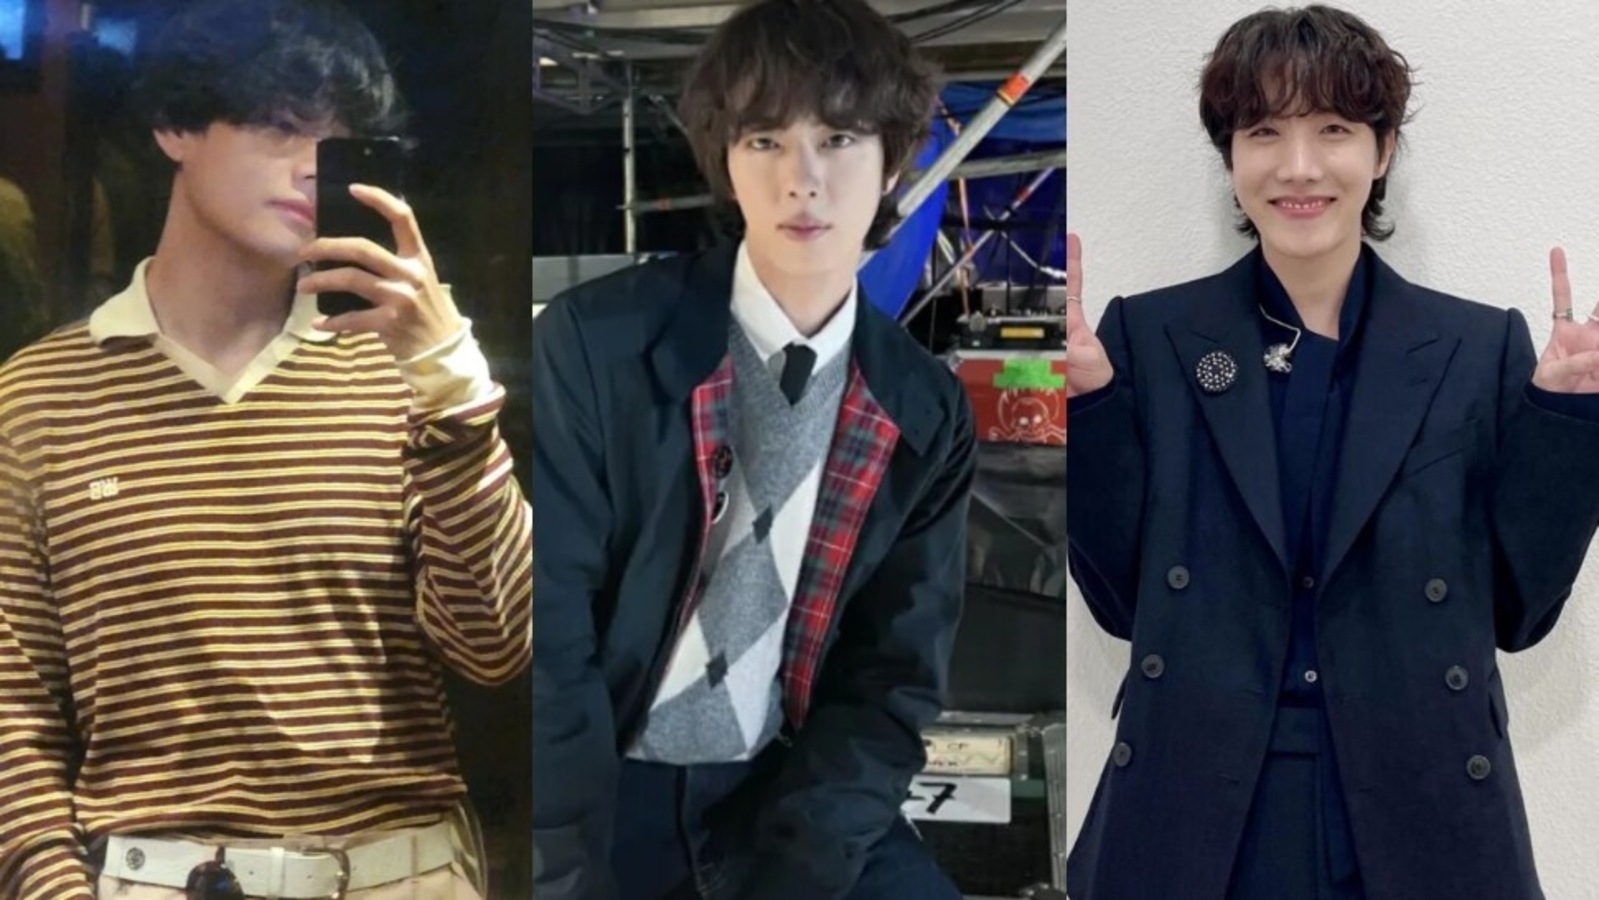 jin-calls-fellow-bts-member-v-best-at-gaming-reveals-j-hope-is-worst-i-tried-to-make-him-play-so-one-time